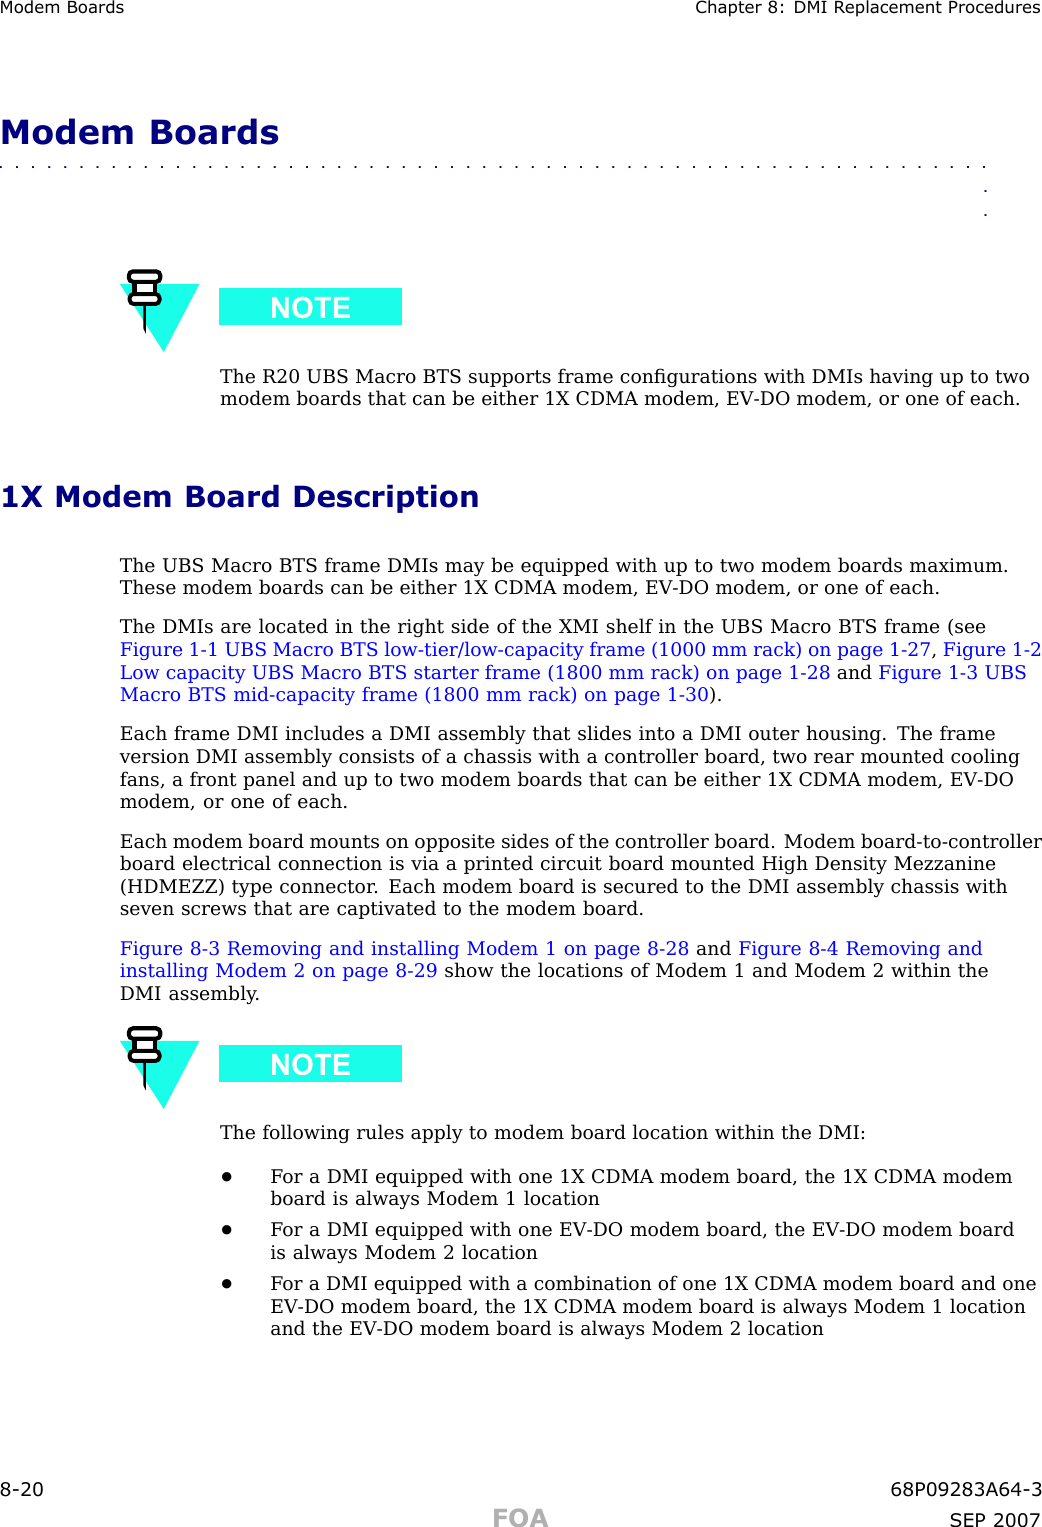 Modem Boards Chapter 8: DMI R eplacement ProceduresModem Boards■■■■■■■■■■■■■■■■■■■■■■■■■■■■■■■■■■■■■■■■■■■■■■■■■■■■■■■■■■■■■■■■The R20 UBS Macro BTS supports frame conﬁgurations with DMIs having up to twomodem boards that can be either 1X CDMA modem, EV -DO modem, or one of each.1X Modem Board DescriptionThe UBS Macro BTS frame DMIs may be equipped with up to two modem boards maximum.These modem boards can be either 1X CDMA modem, EV -DO modem, or one of each.The DMIs are located in the right side of the XMI shelf in the UBS Macro BTS frame (seeFigure 1 -1 UBS Macro BTS low -tier/low -capacity frame (1000 mm rack) on page 1 - 27 ,Figure 1 -2Low capacity UBS Macro BTS starter frame (1800 mm rack) on page 1 - 28 and Figure 1 -3 UBSMacro BTS mid -capacity frame (1800 mm rack) on page 1 - 30 ).Each frame DMI includes a DMI assembly that slides into a DMI outer housing. The frameversion DMI assembly consists of a chassis with a controller board, two rear mounted coolingfans, a front panel and up to two modem boards that can be either 1X CDMA modem, EV -DOmodem, or one of each.Each modem board mounts on opposite sides of the controller board. Modem board -to -controllerboard electrical connection is via a printed circuit board mounted High Density Mezzanine(HDMEZZ) type connector . Each modem board is secured to the DMI assembly chassis withseven screws that are captivated to the modem board.Figure 8 -3 Removing and installing Modem 1 on page 8 - 28 and Figure 8 -4 Removing andinstalling Modem 2 on page 8 - 29 show the locations of Modem 1 and Modem 2 within theDMI assembly .The following rules apply to modem board location within the DMI:•F or a DMI equipped with one 1X CDMA modem board, the 1X CDMA modemboard is always Modem 1 location•F or a DMI equipped with one EV -DO modem board, the EV -DO modem boardis always Modem 2 location•F or a DMI equipped with a combination of one 1X CDMA modem board and oneEV -DO modem board, the 1X CDMA modem board is always Modem 1 locationand the EV -DO modem board is always Modem 2 location8 -20 68P09283A64 -3FOA SEP 2007